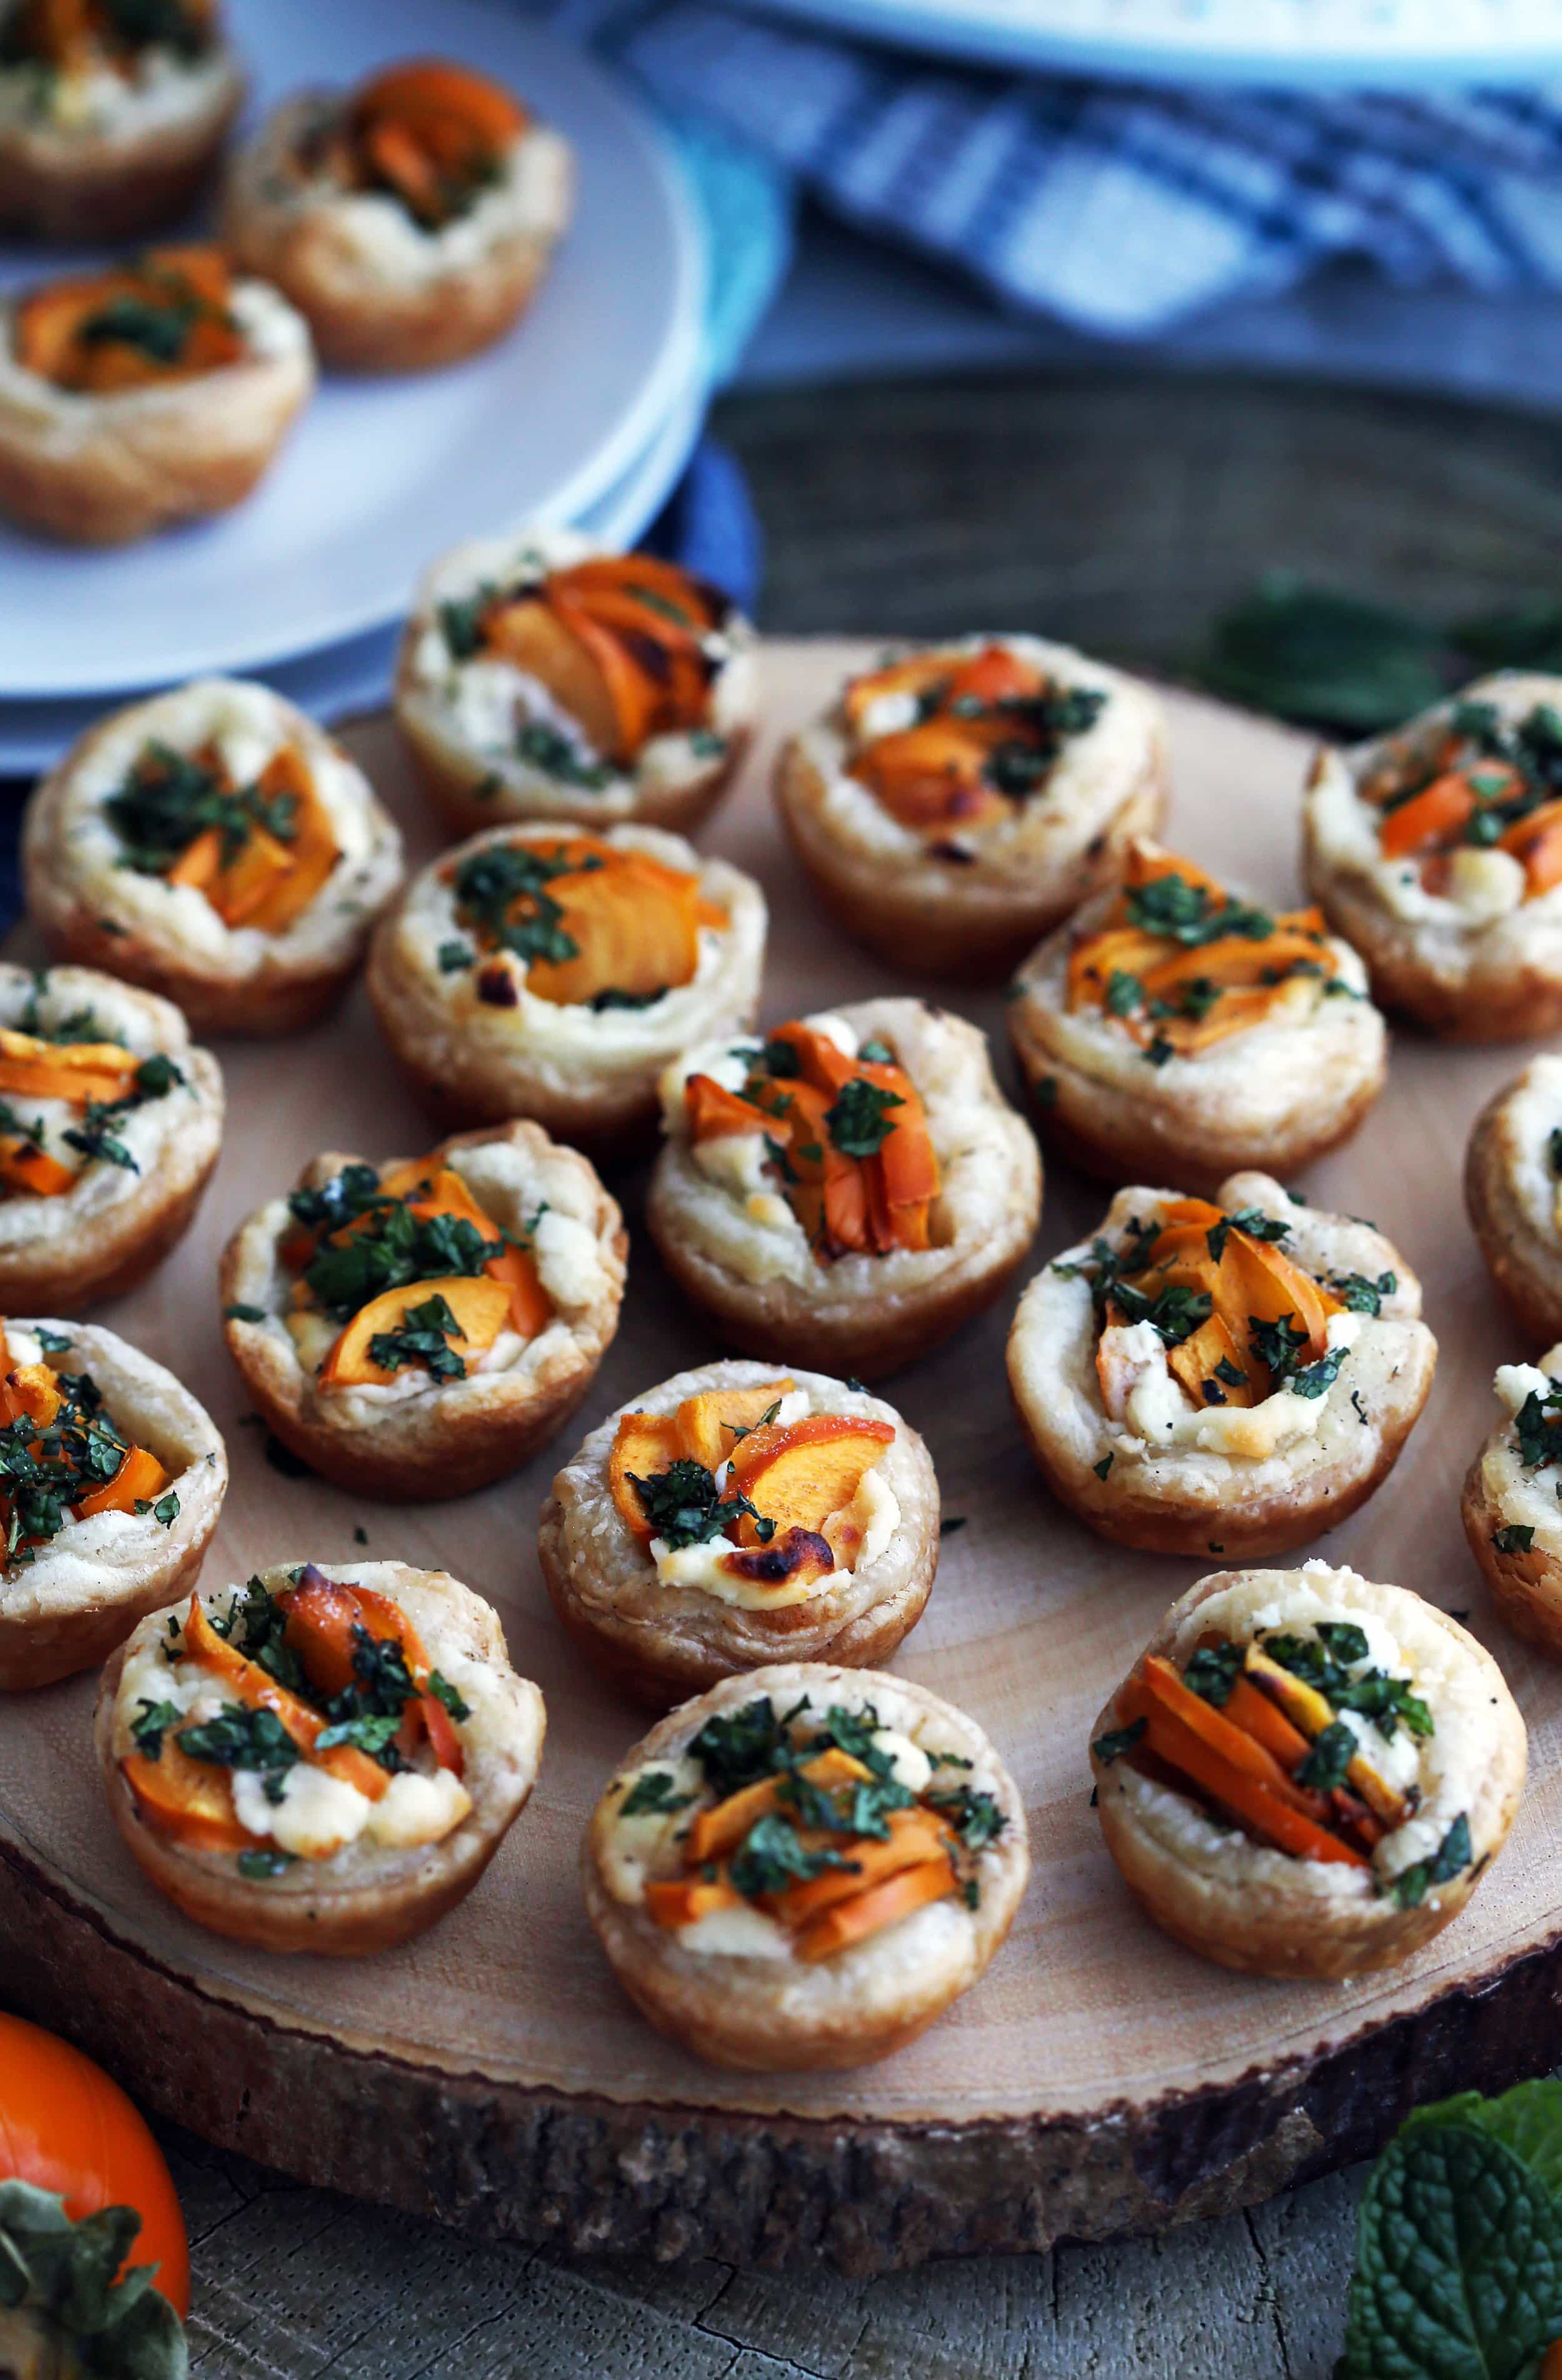 Persimmon Goat Cheese Tartlets with fresh mint topping on a large round wooden platter.